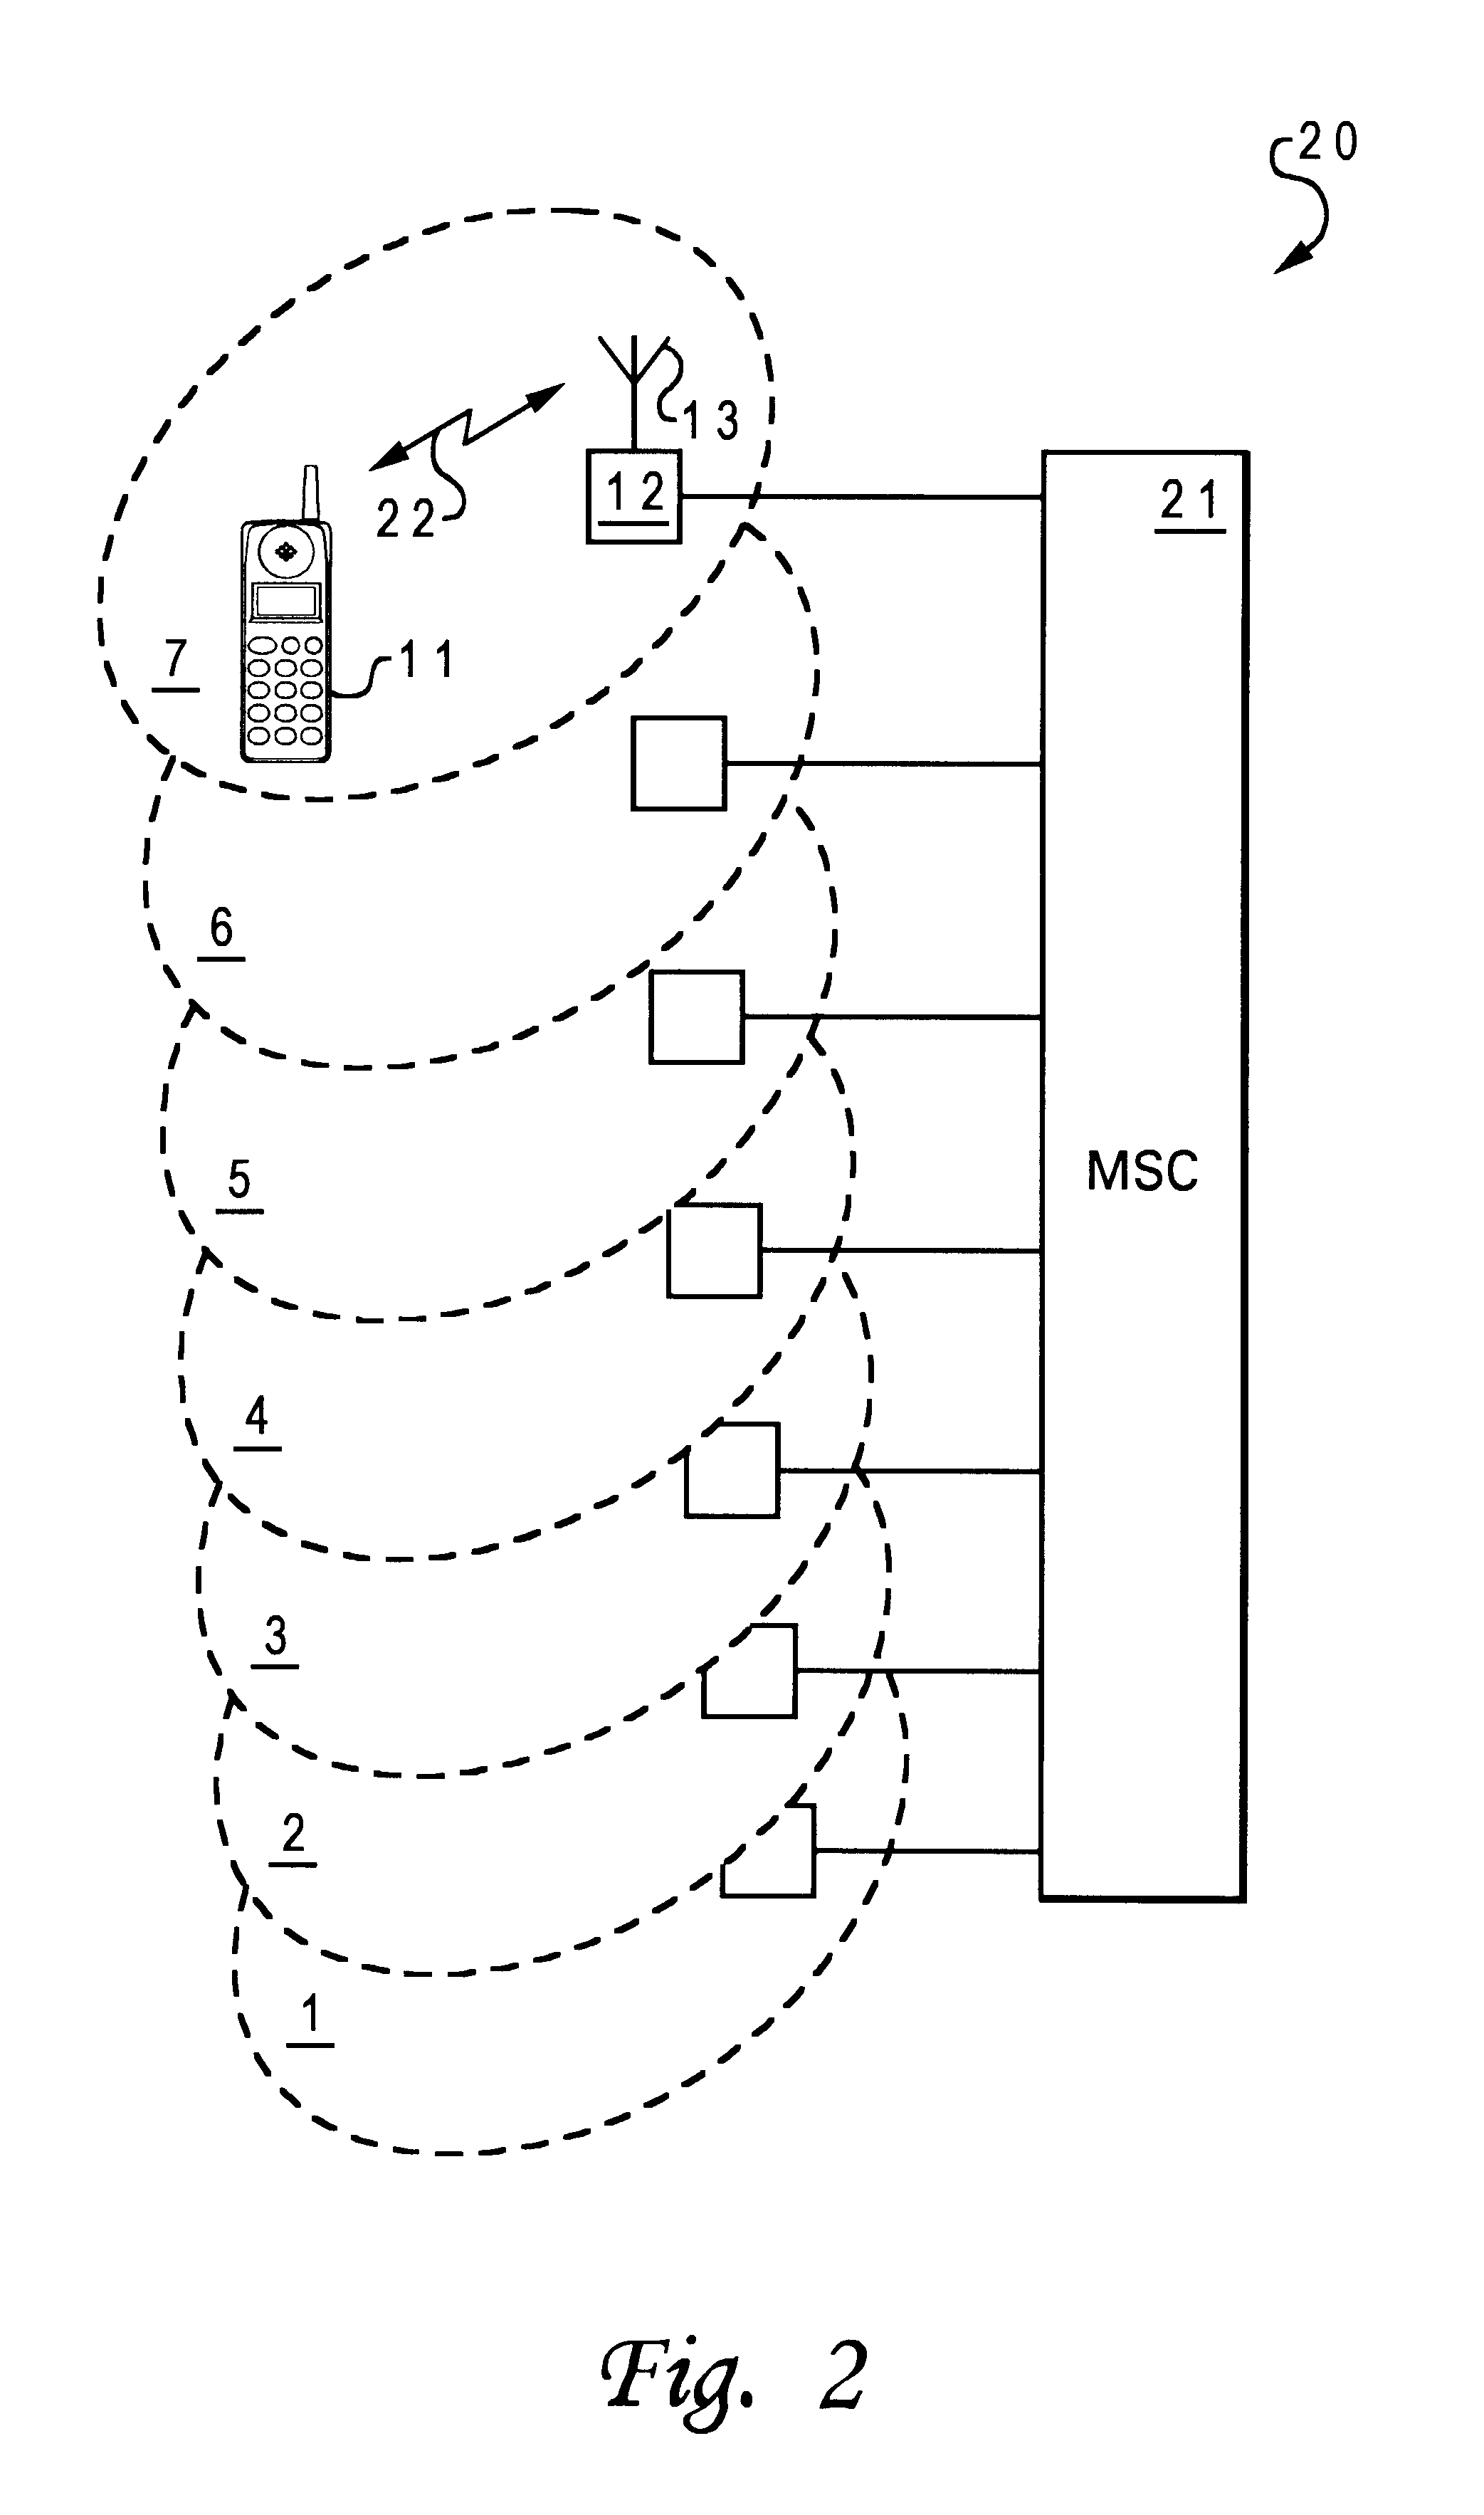 Method and system for locating a mobile telephone within a mobile telephone communication network